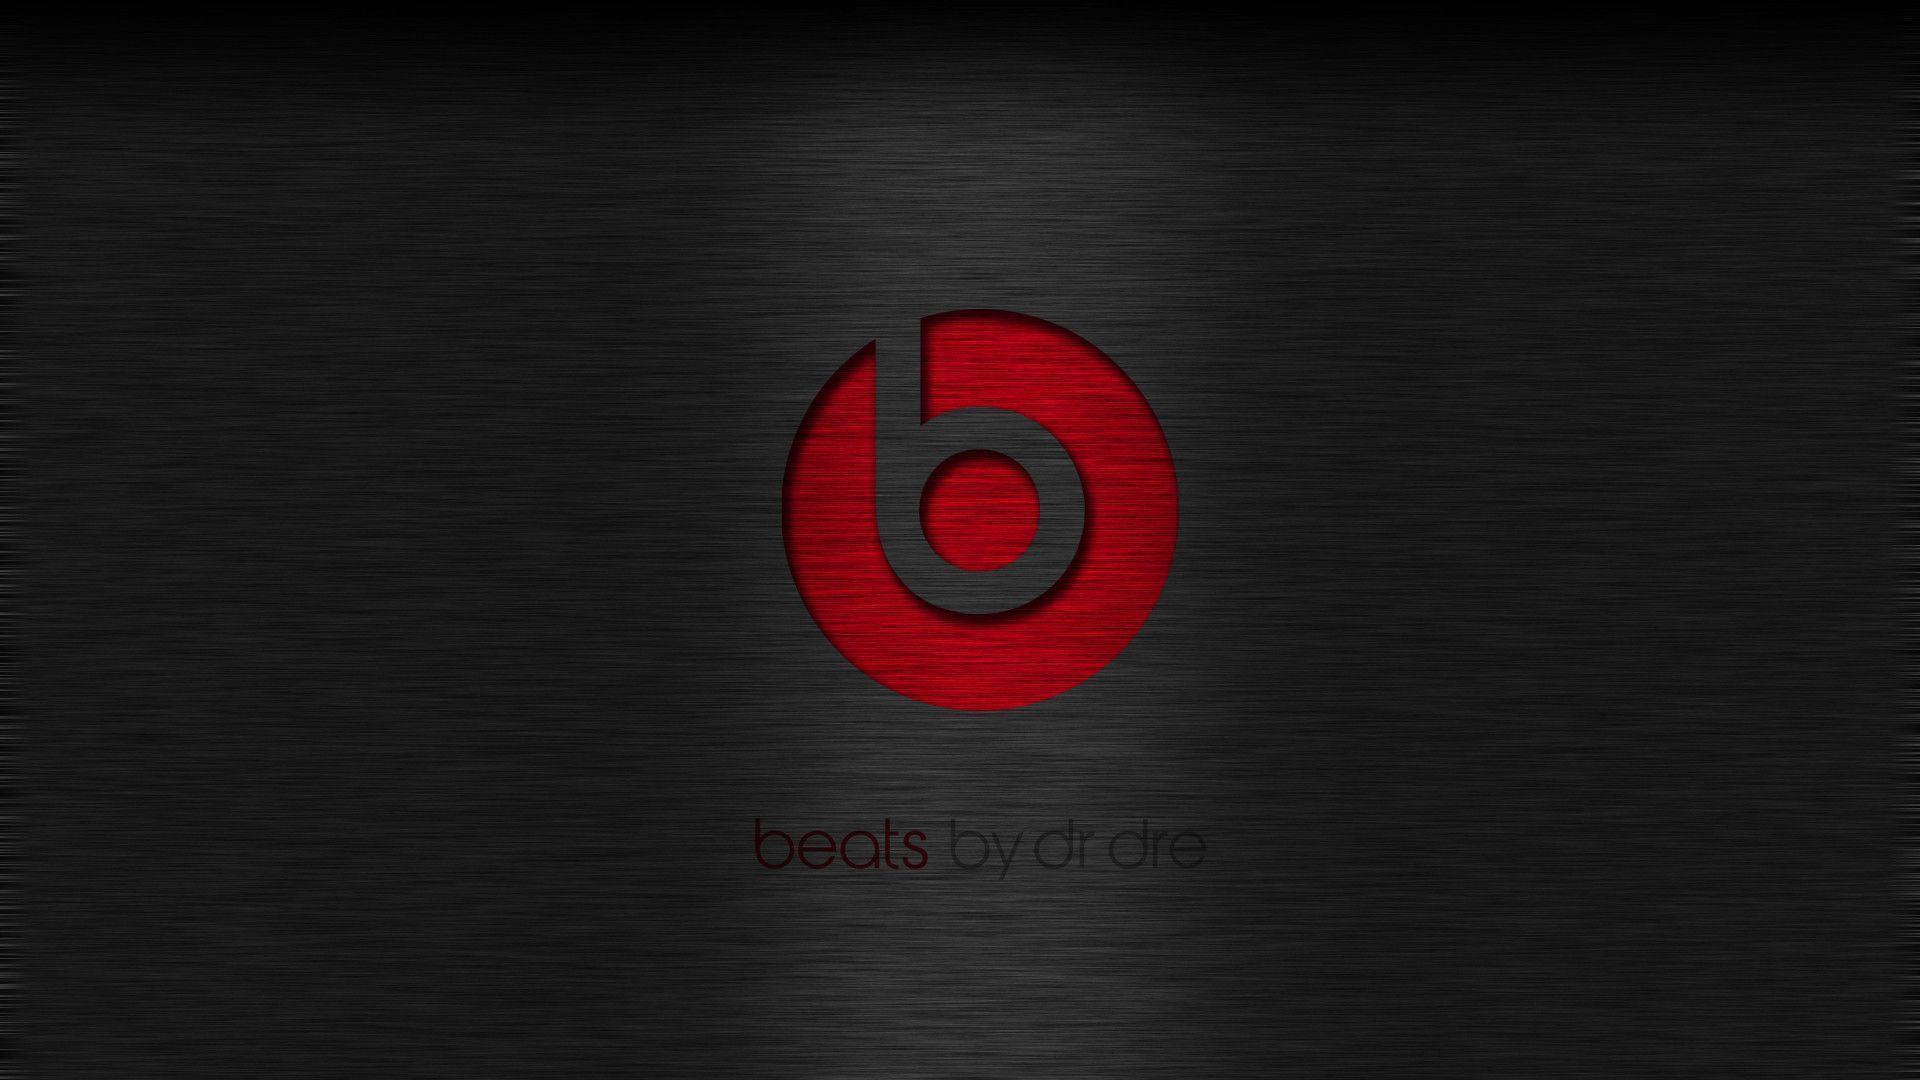 Beats By Dr Dre Wallpapers Top Free Beats By Dr Dre Backgrounds Wallpaperaccess